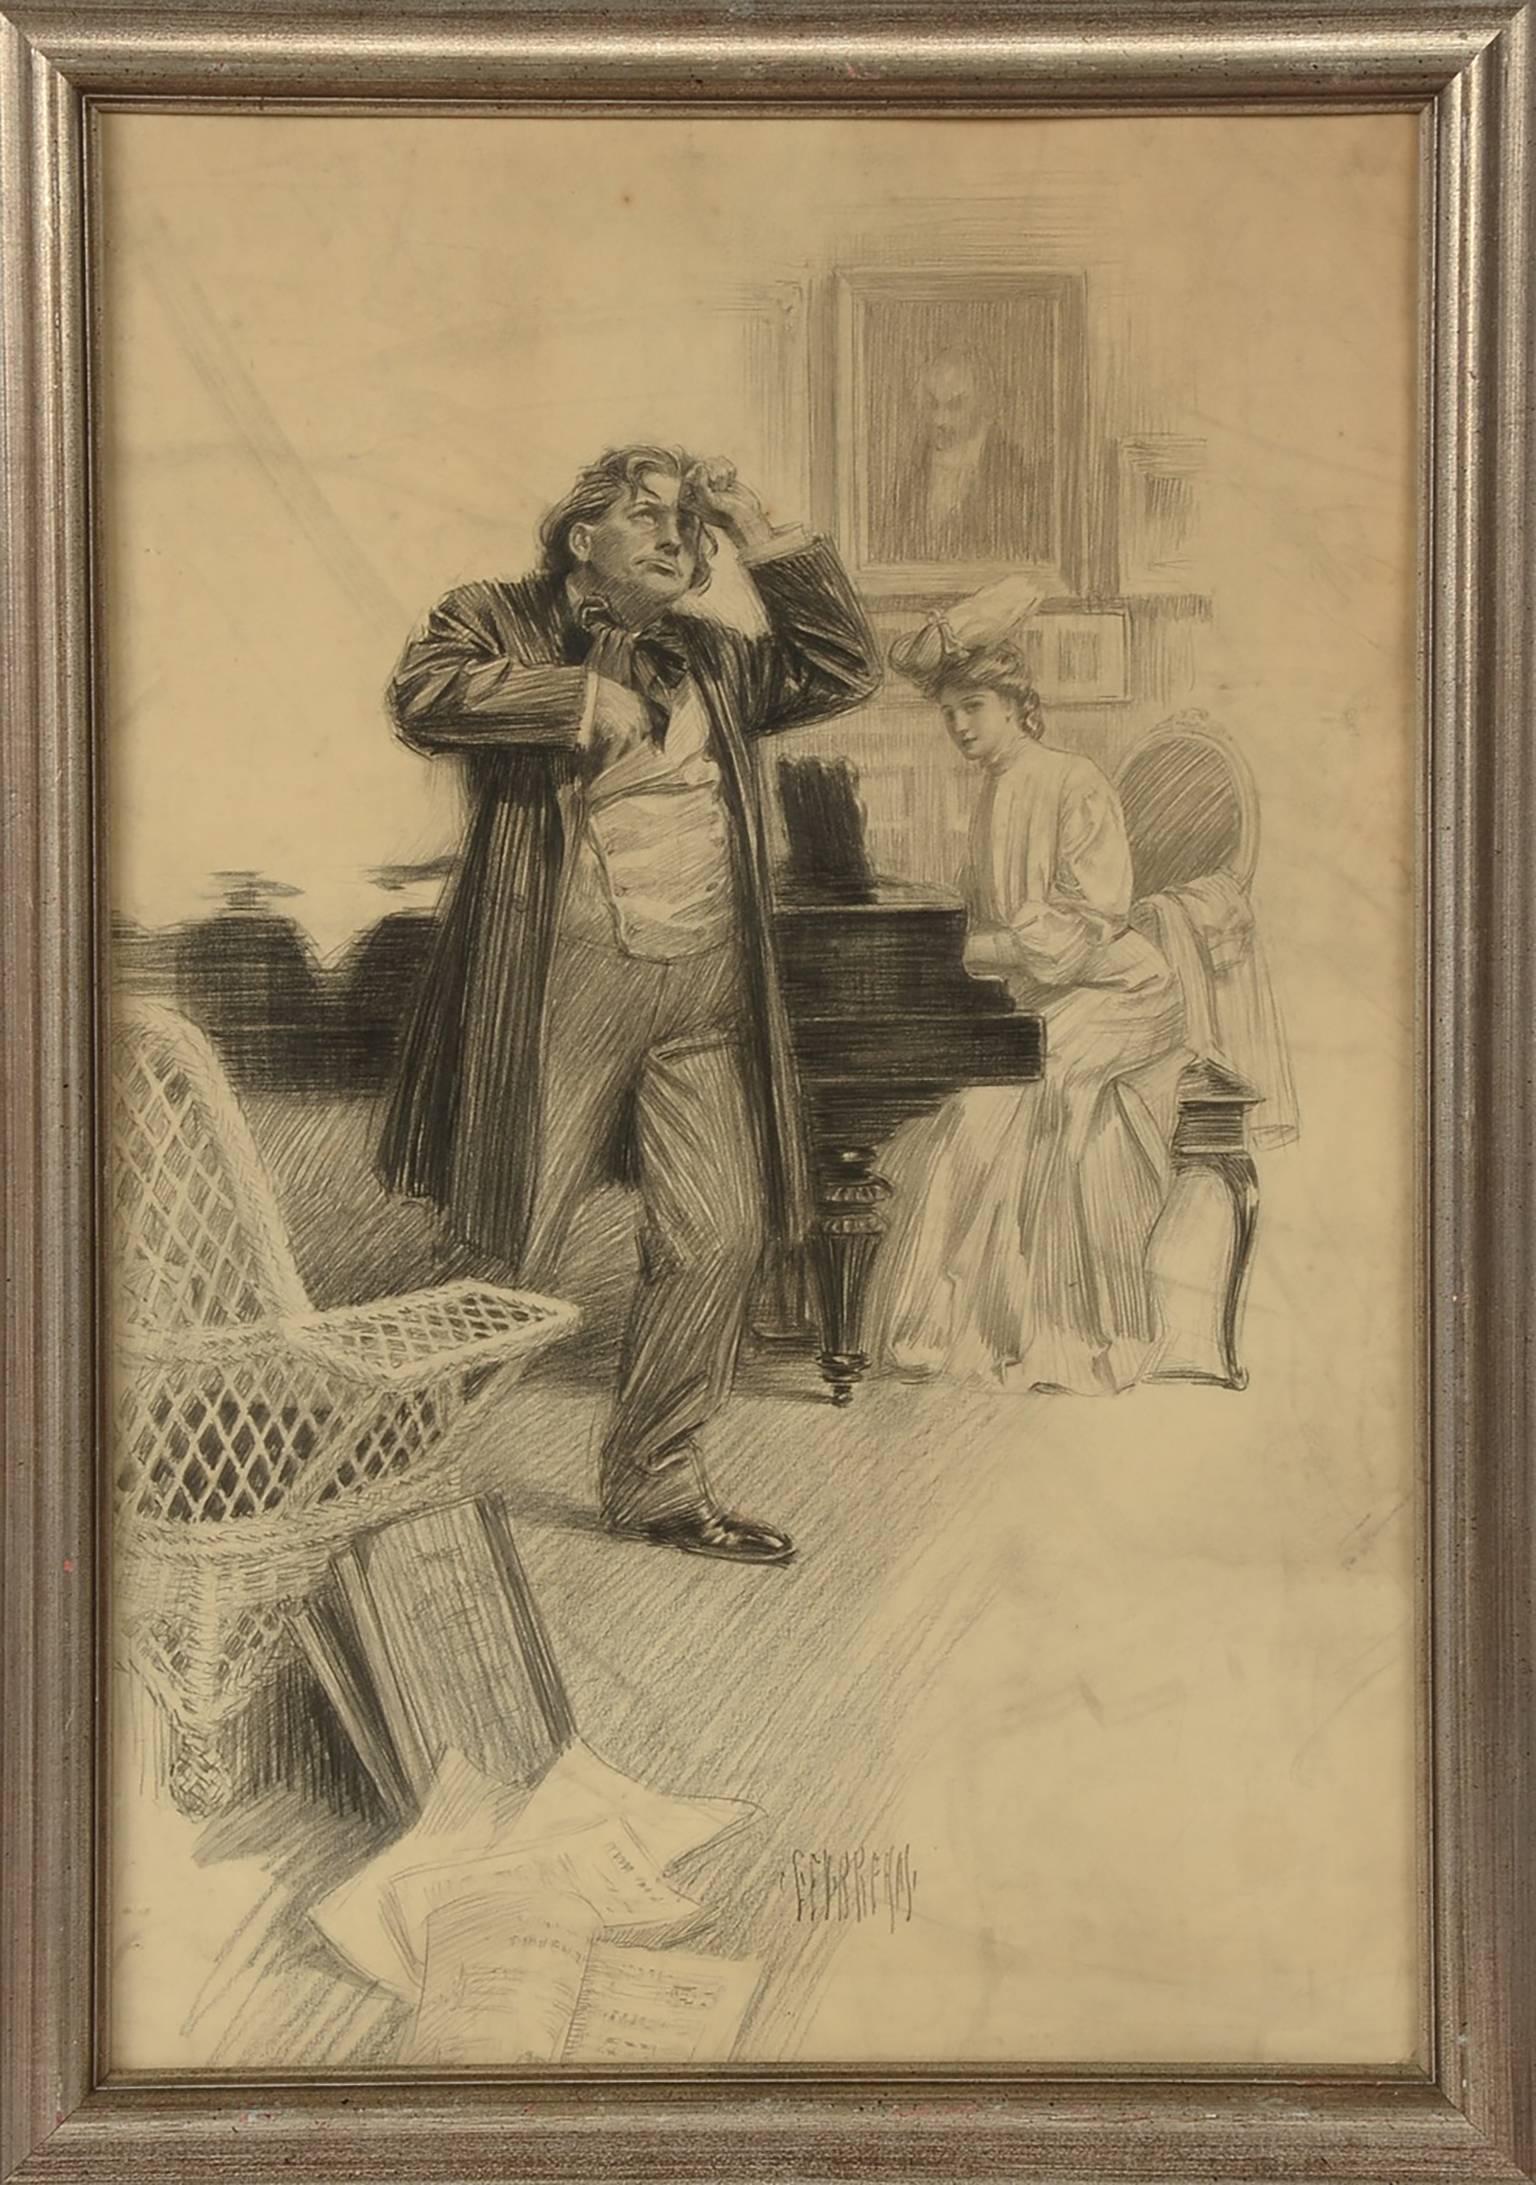 An original antique graphite drawing on ivory woven paper of a Victorian interior scene by famed illustrator and artist George Brehm (1878 – 1966). In the drawing, a woman plays piano as a man walks across the room, apparently in distress. Music is